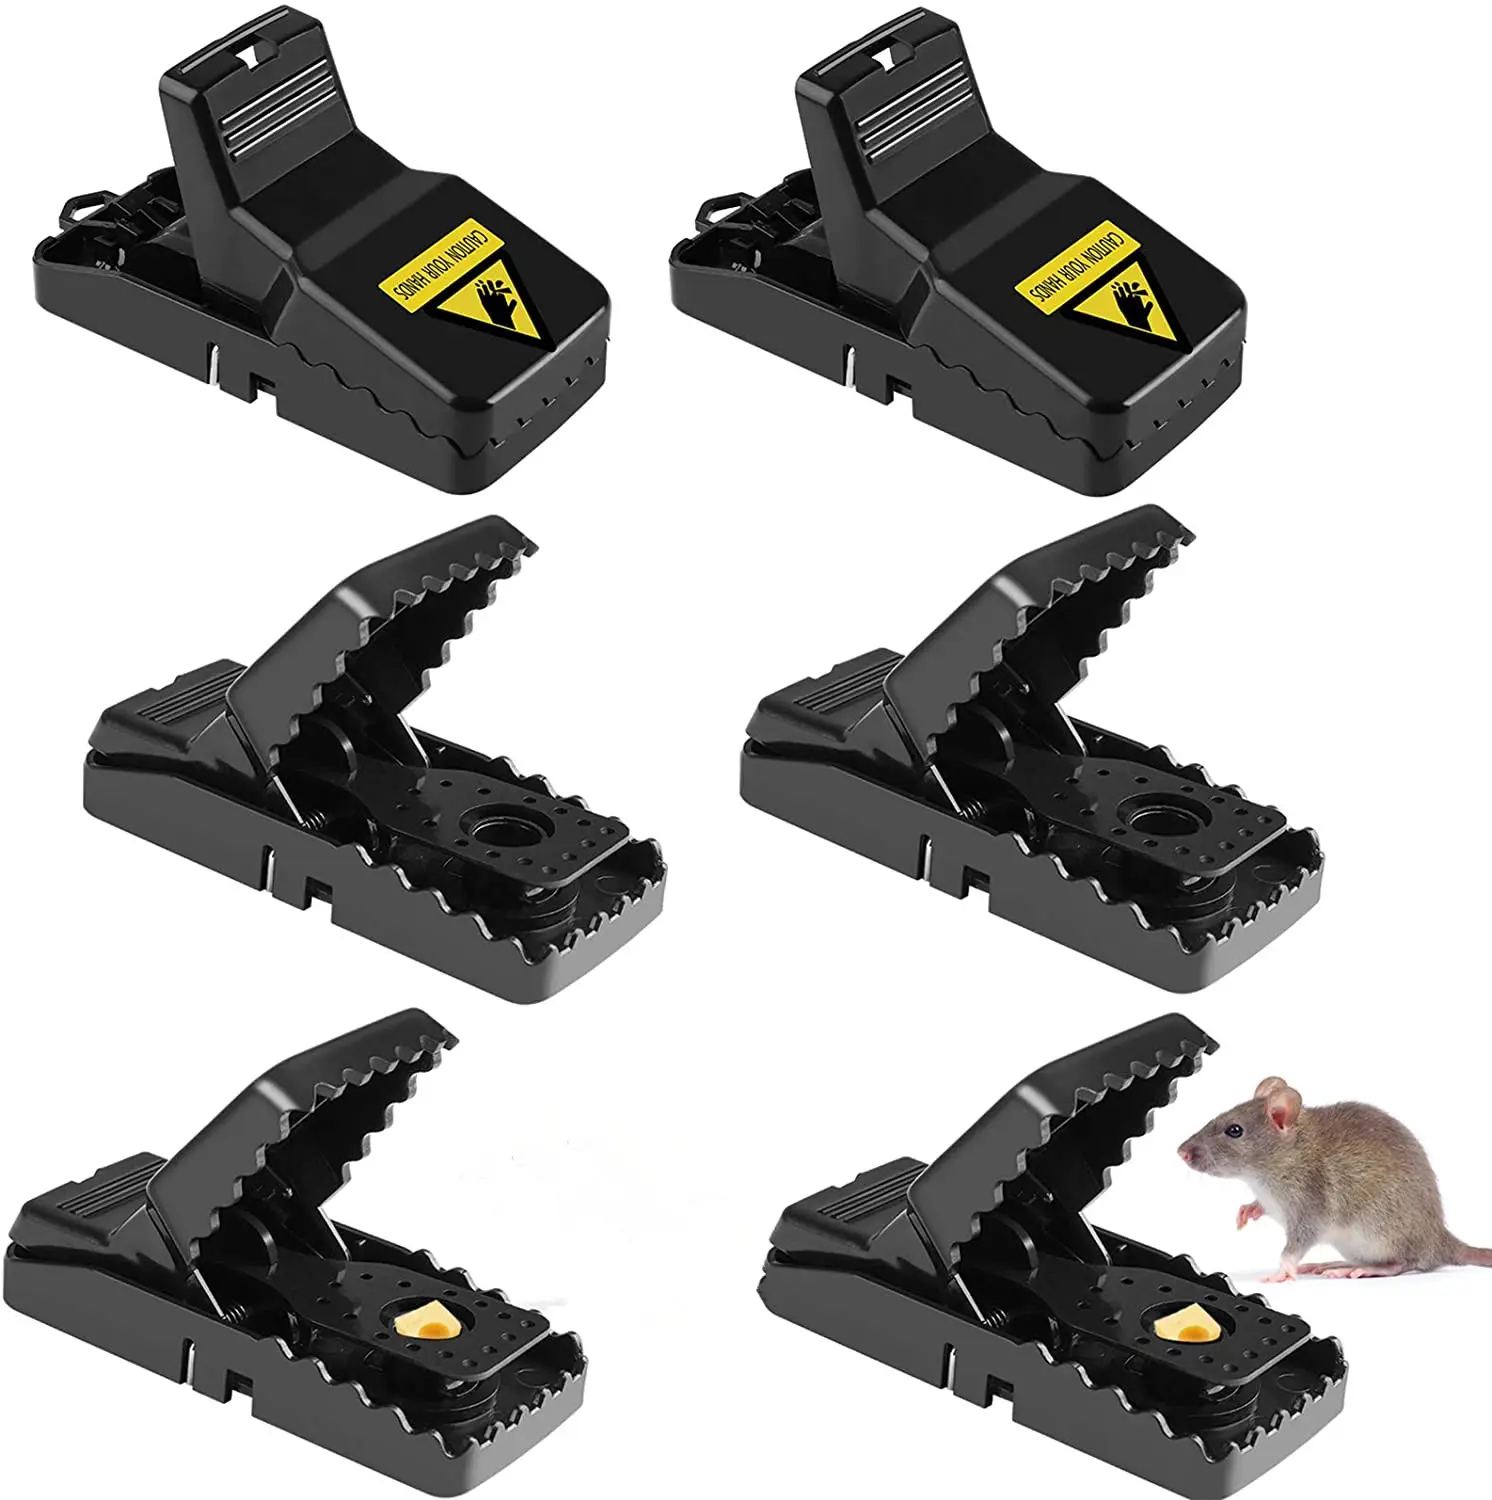 Hot sell 6 pack plastic mouse trap kill fast mice rat trap reusable mouse snap trap